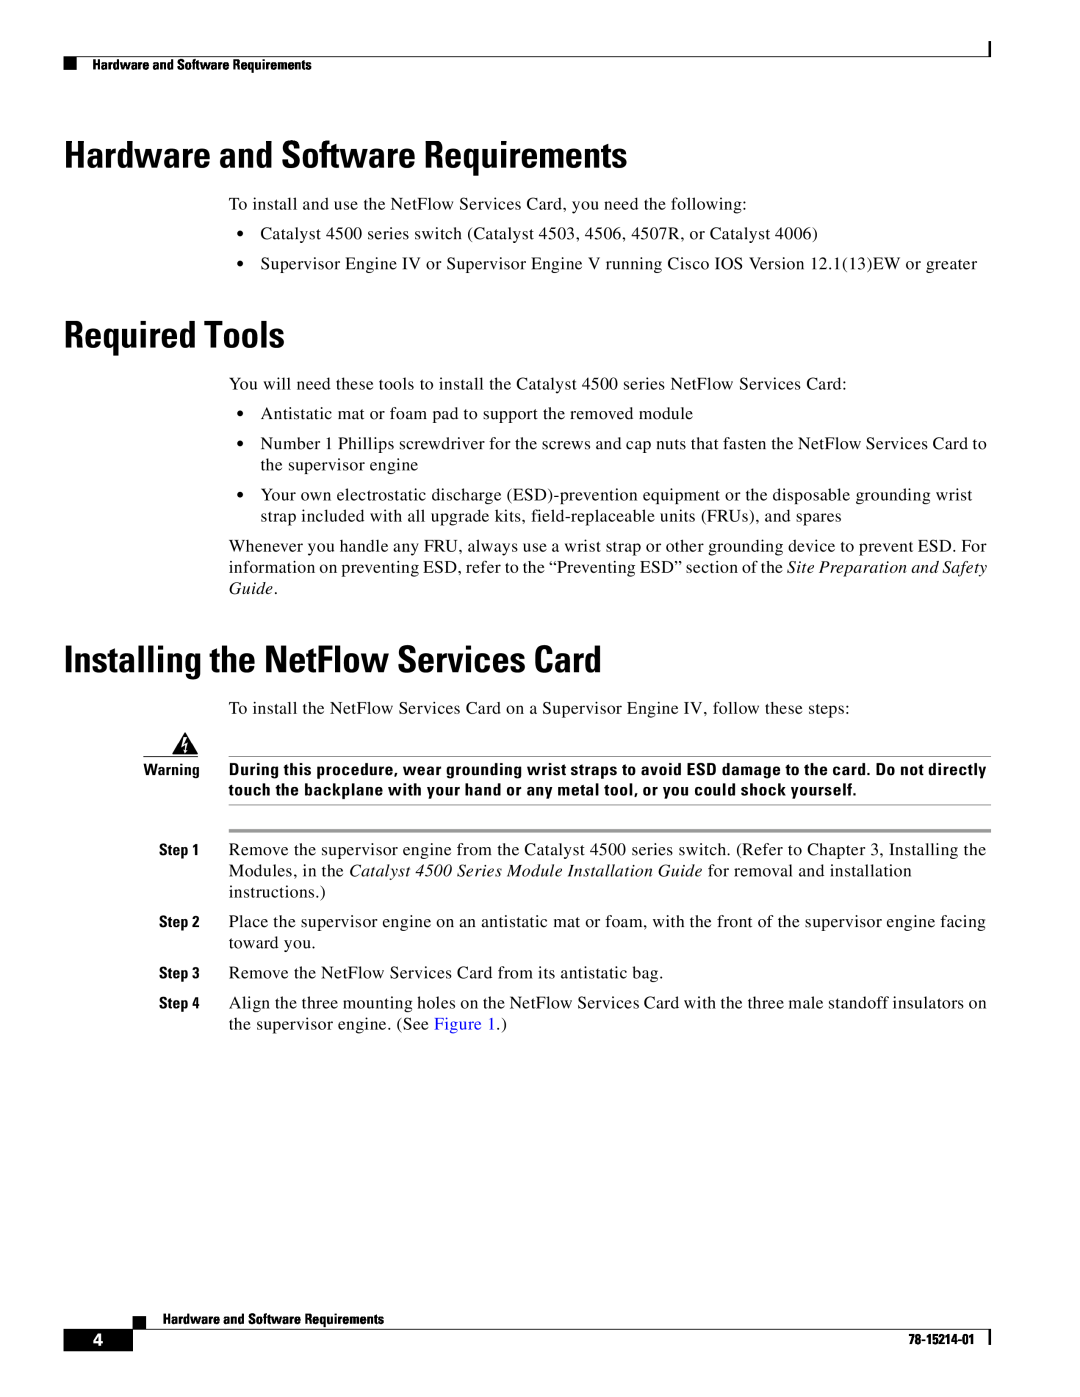 Cisco Systems WS-F4531 manual Hardware and Software Requirements, Required Tools, Installing the NetFlow Services Card 